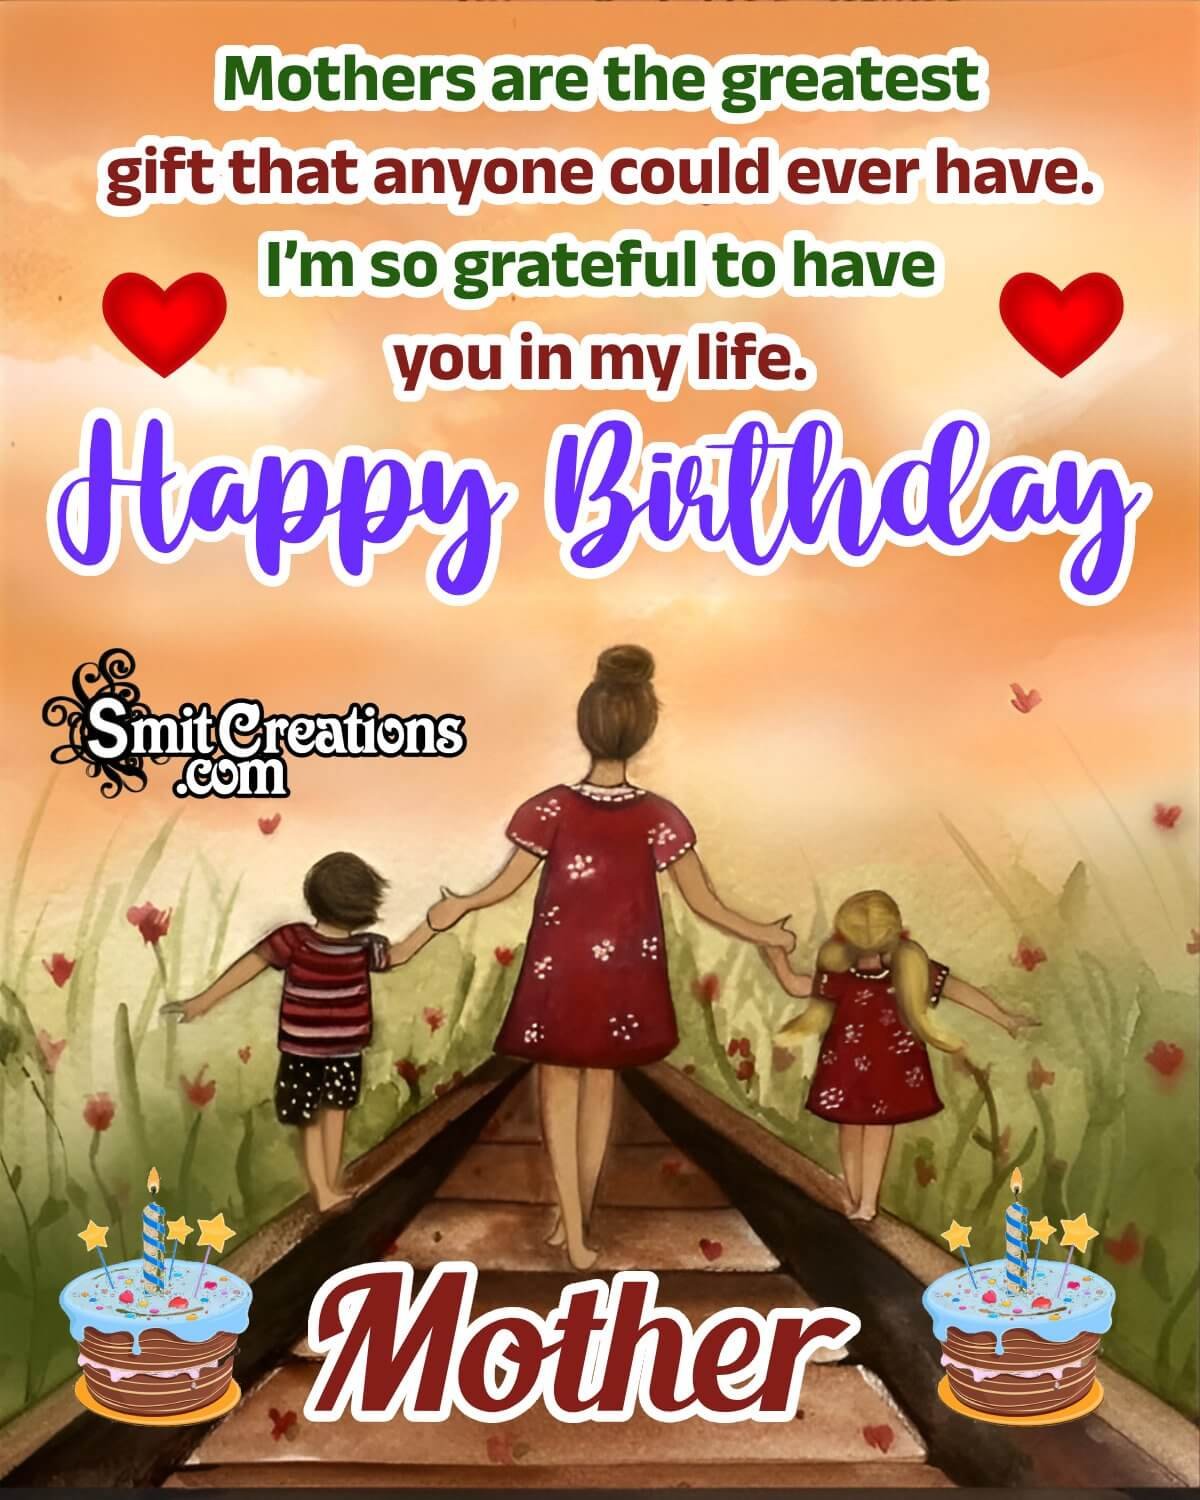 Fantastic Happy Birthday Message Image For Mother